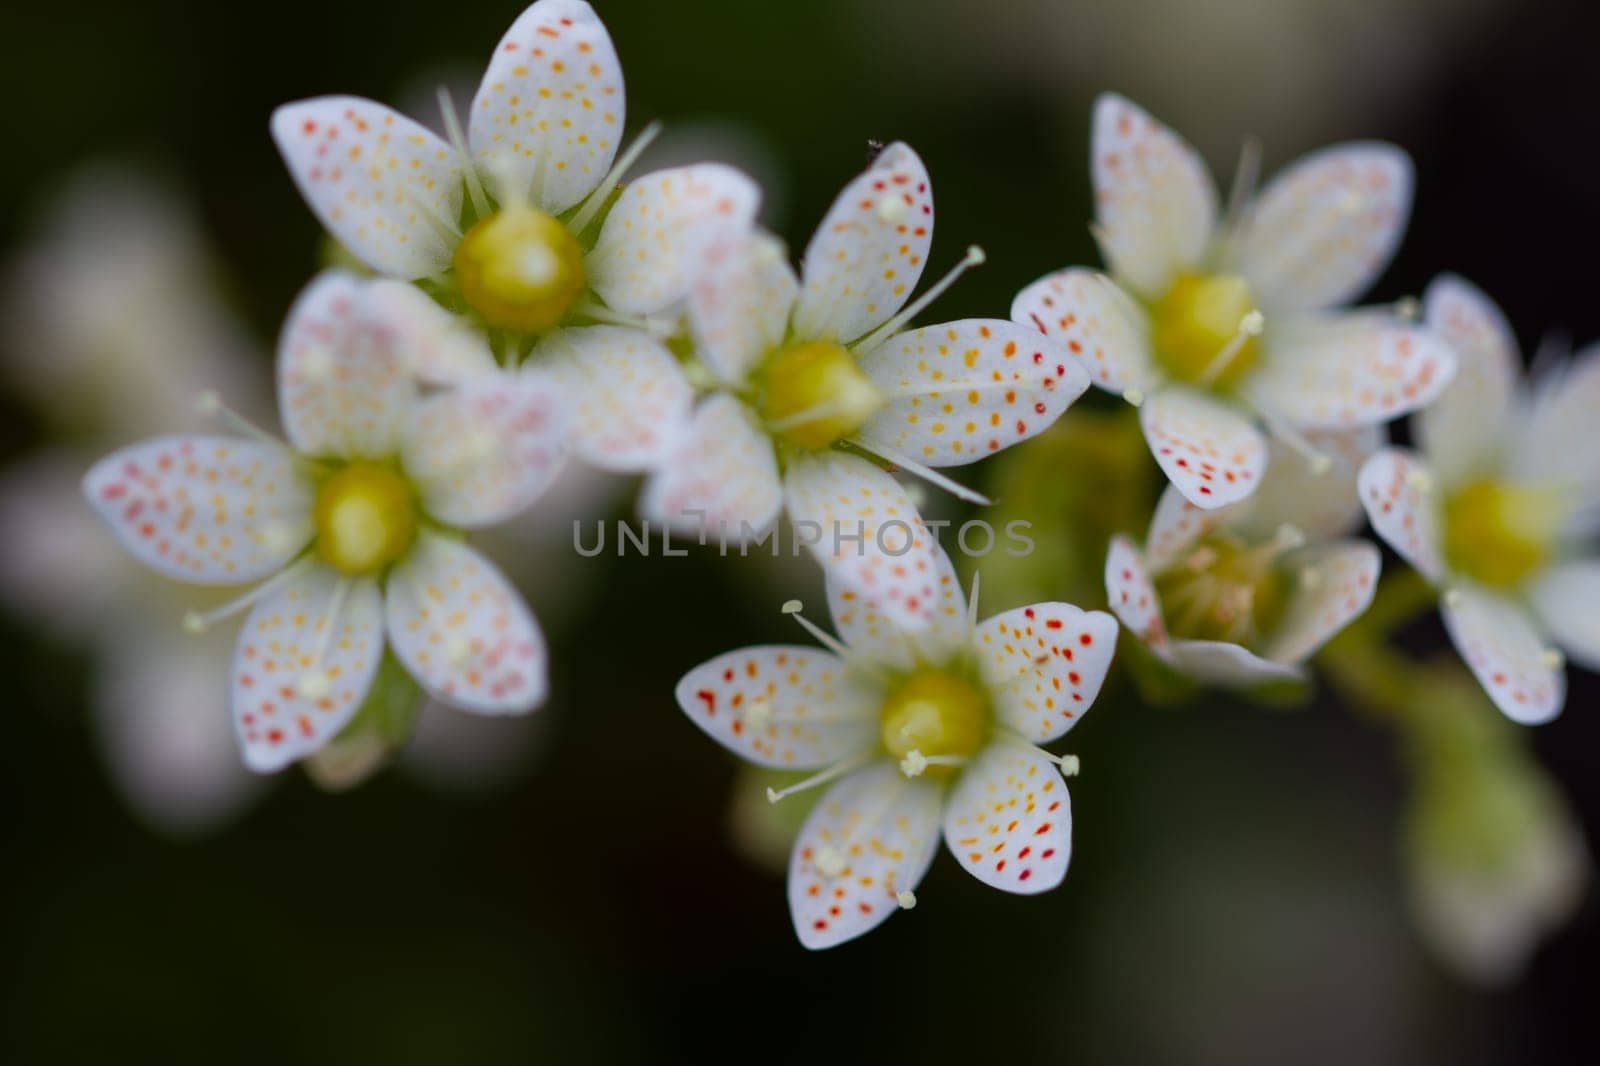 Prickly Saxifrage or Saxifraga tricuspidata, small cream coloured flowers with orange spots. Prickly saxifrage is a loosely matted perennial, that grows in large bunches, close to the ground. Arviat, Nunavut, Canada